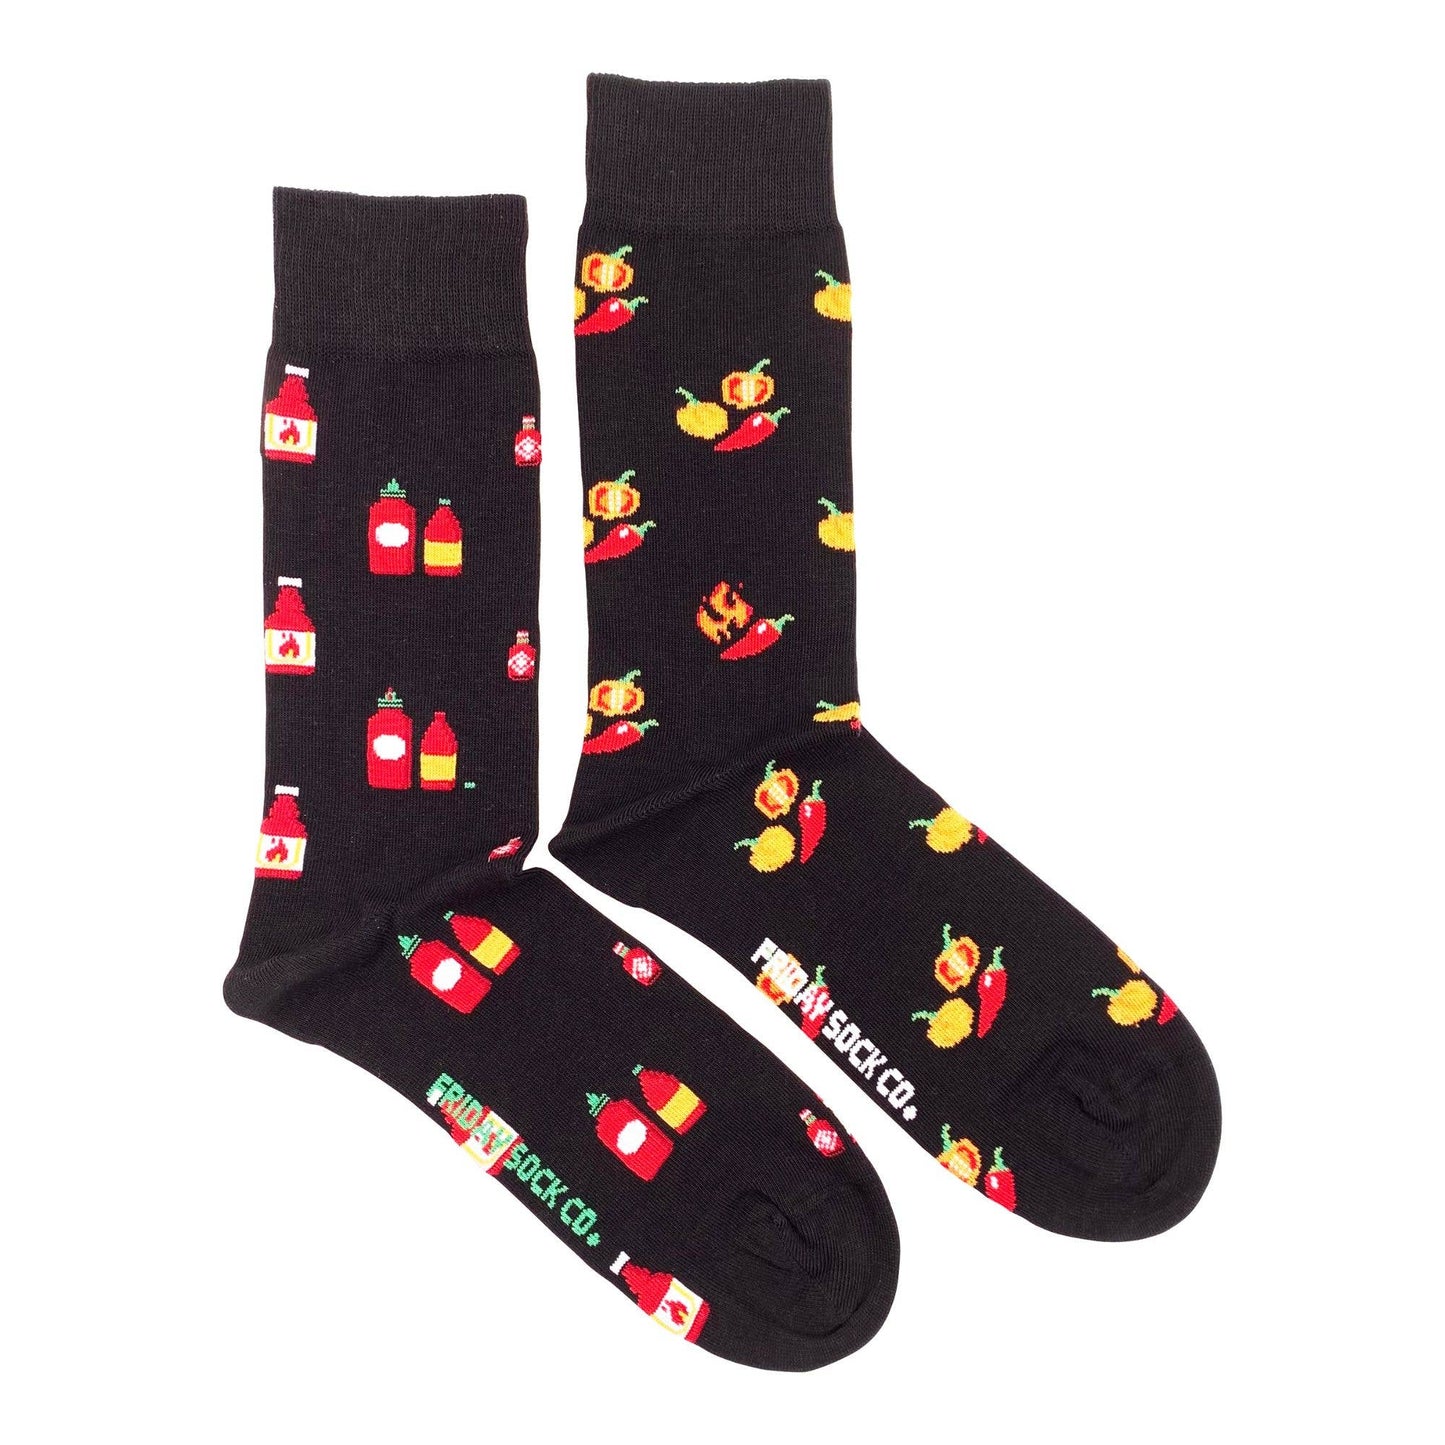 Fun Men's Socks | Hot Sauce & Peppers | Silly | Mismatched